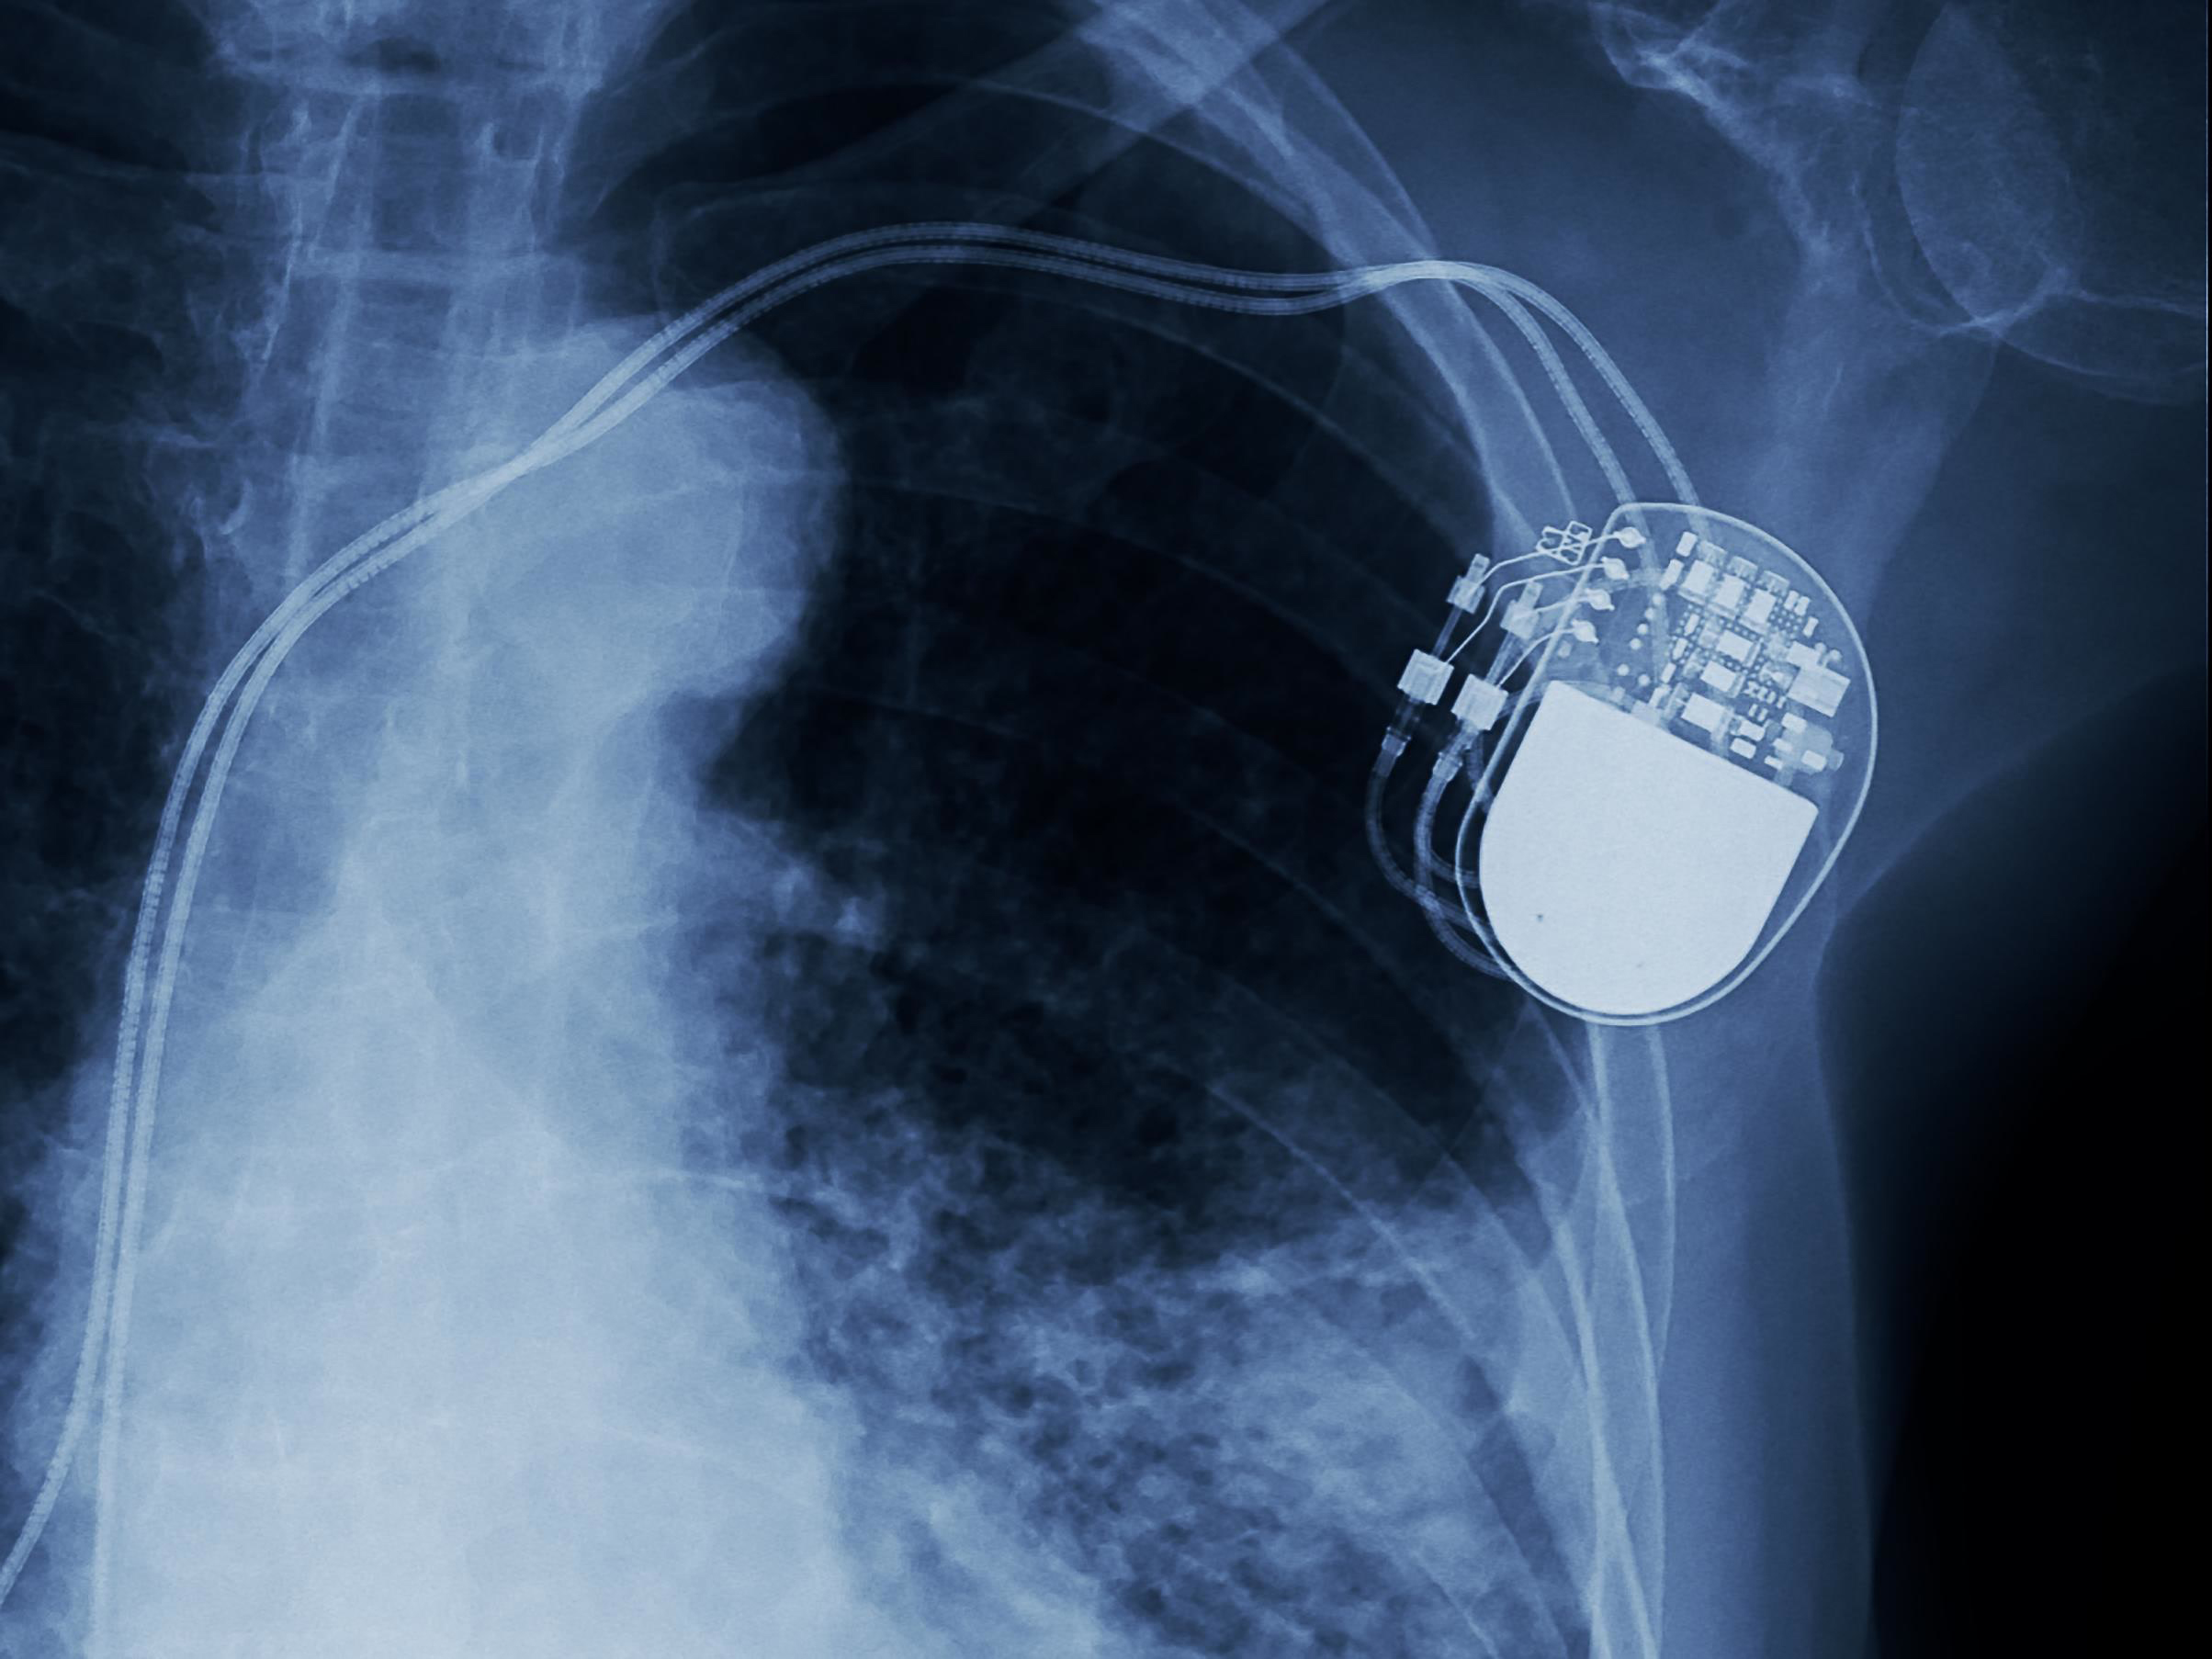 FDA Recalls 465,000 Pacemakers Over Cyber Security Threat